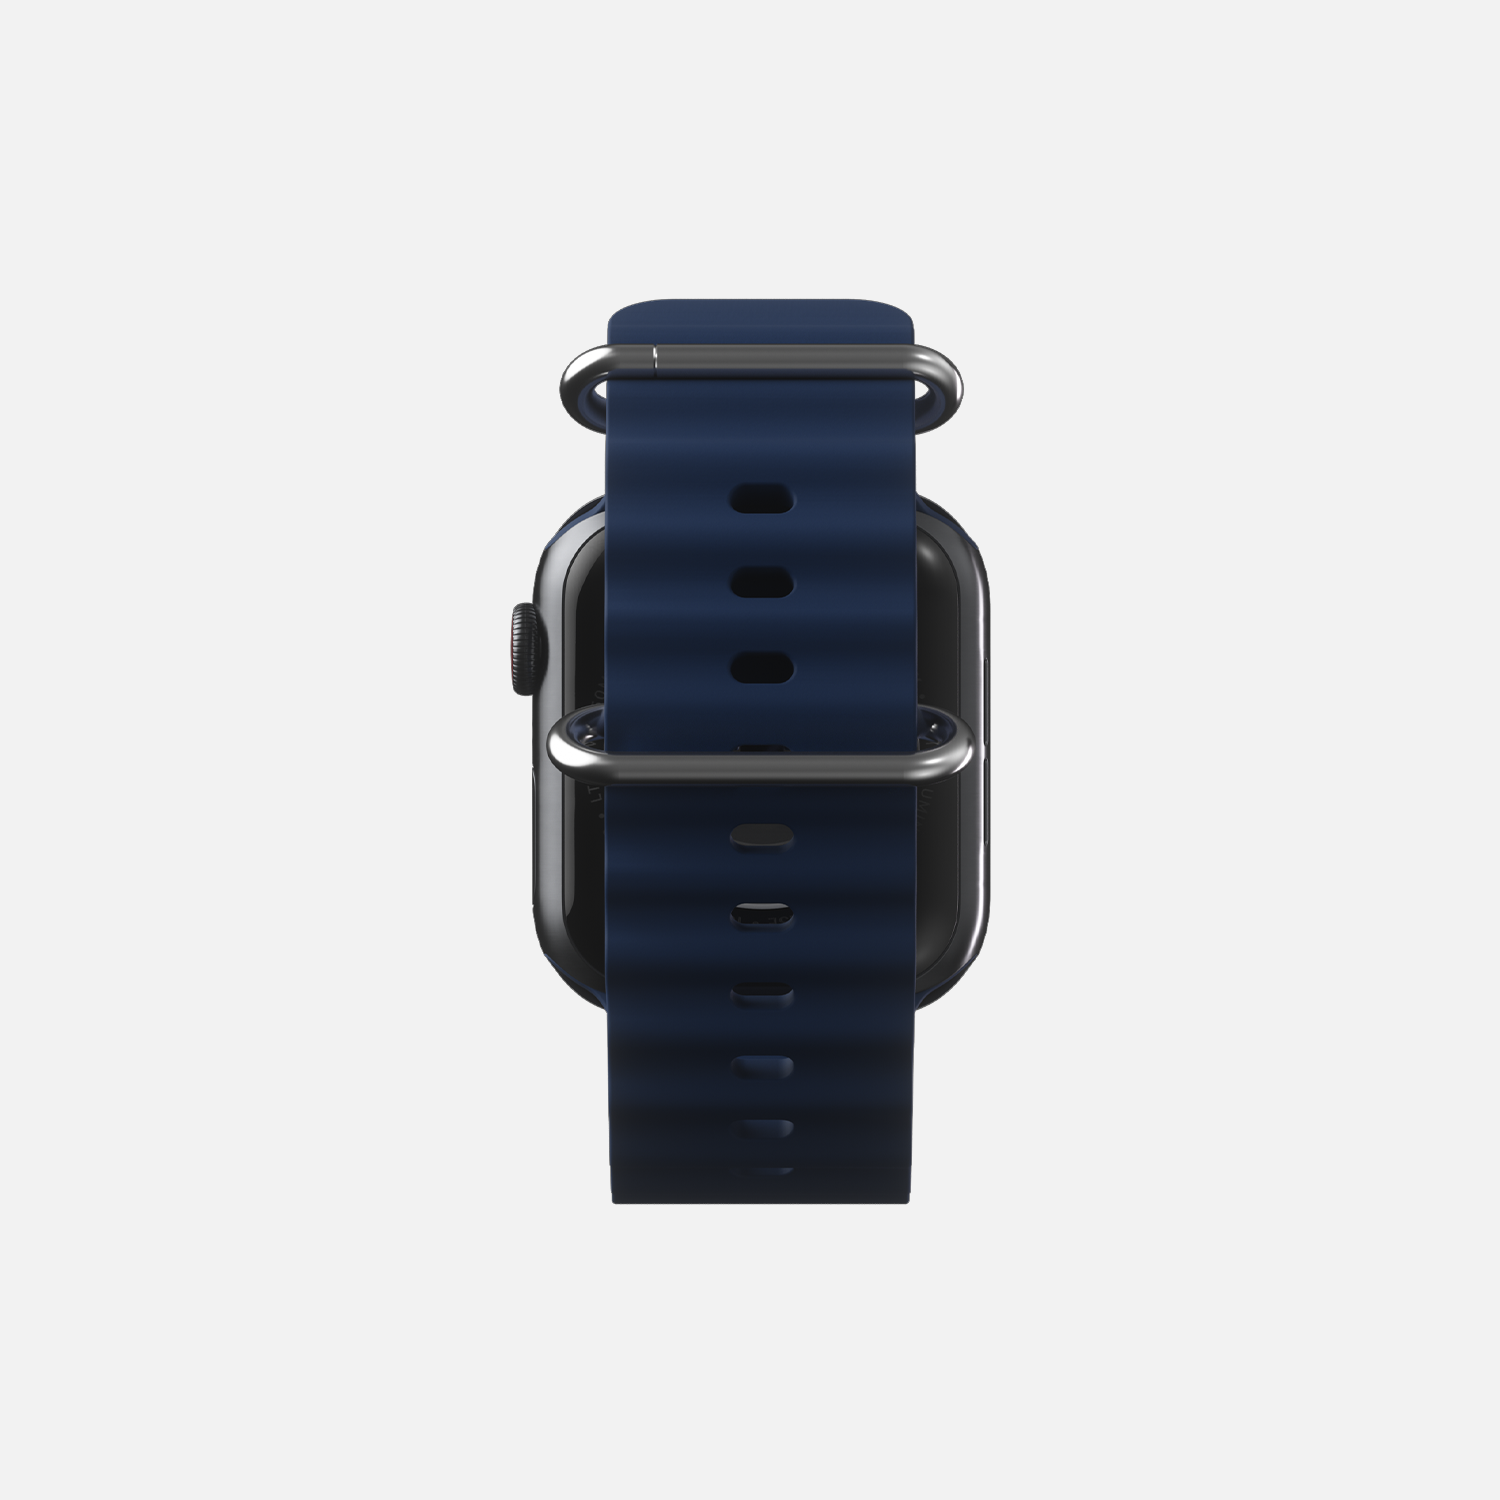 Navy blue smartwatch with silicone band, isolated on white background.